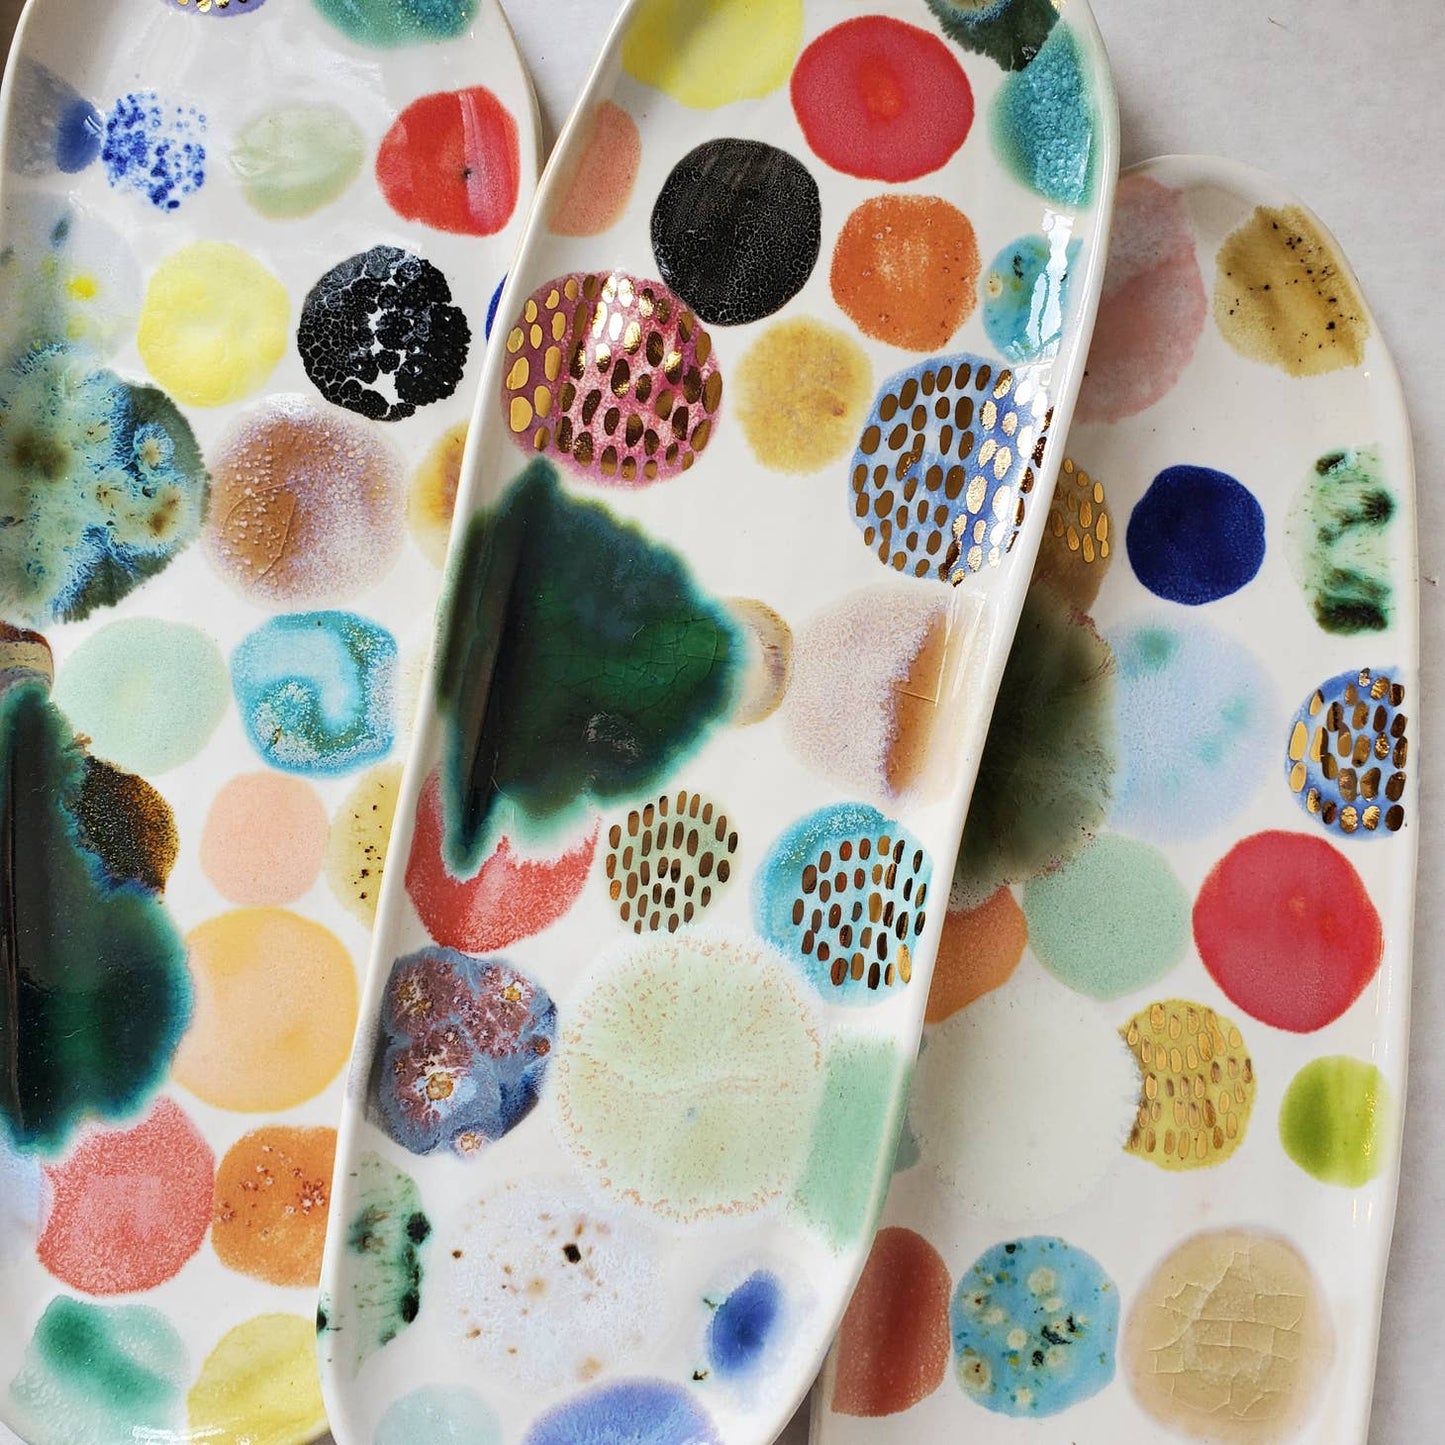 ceramic curious clay / Handmade snack tray featuring colored splotches and gold luster to turn any cocktail or dinner party up a notch. Each tray features one-of-a-kind glaze applications and is completely unique. The perfect host or hostess gift!